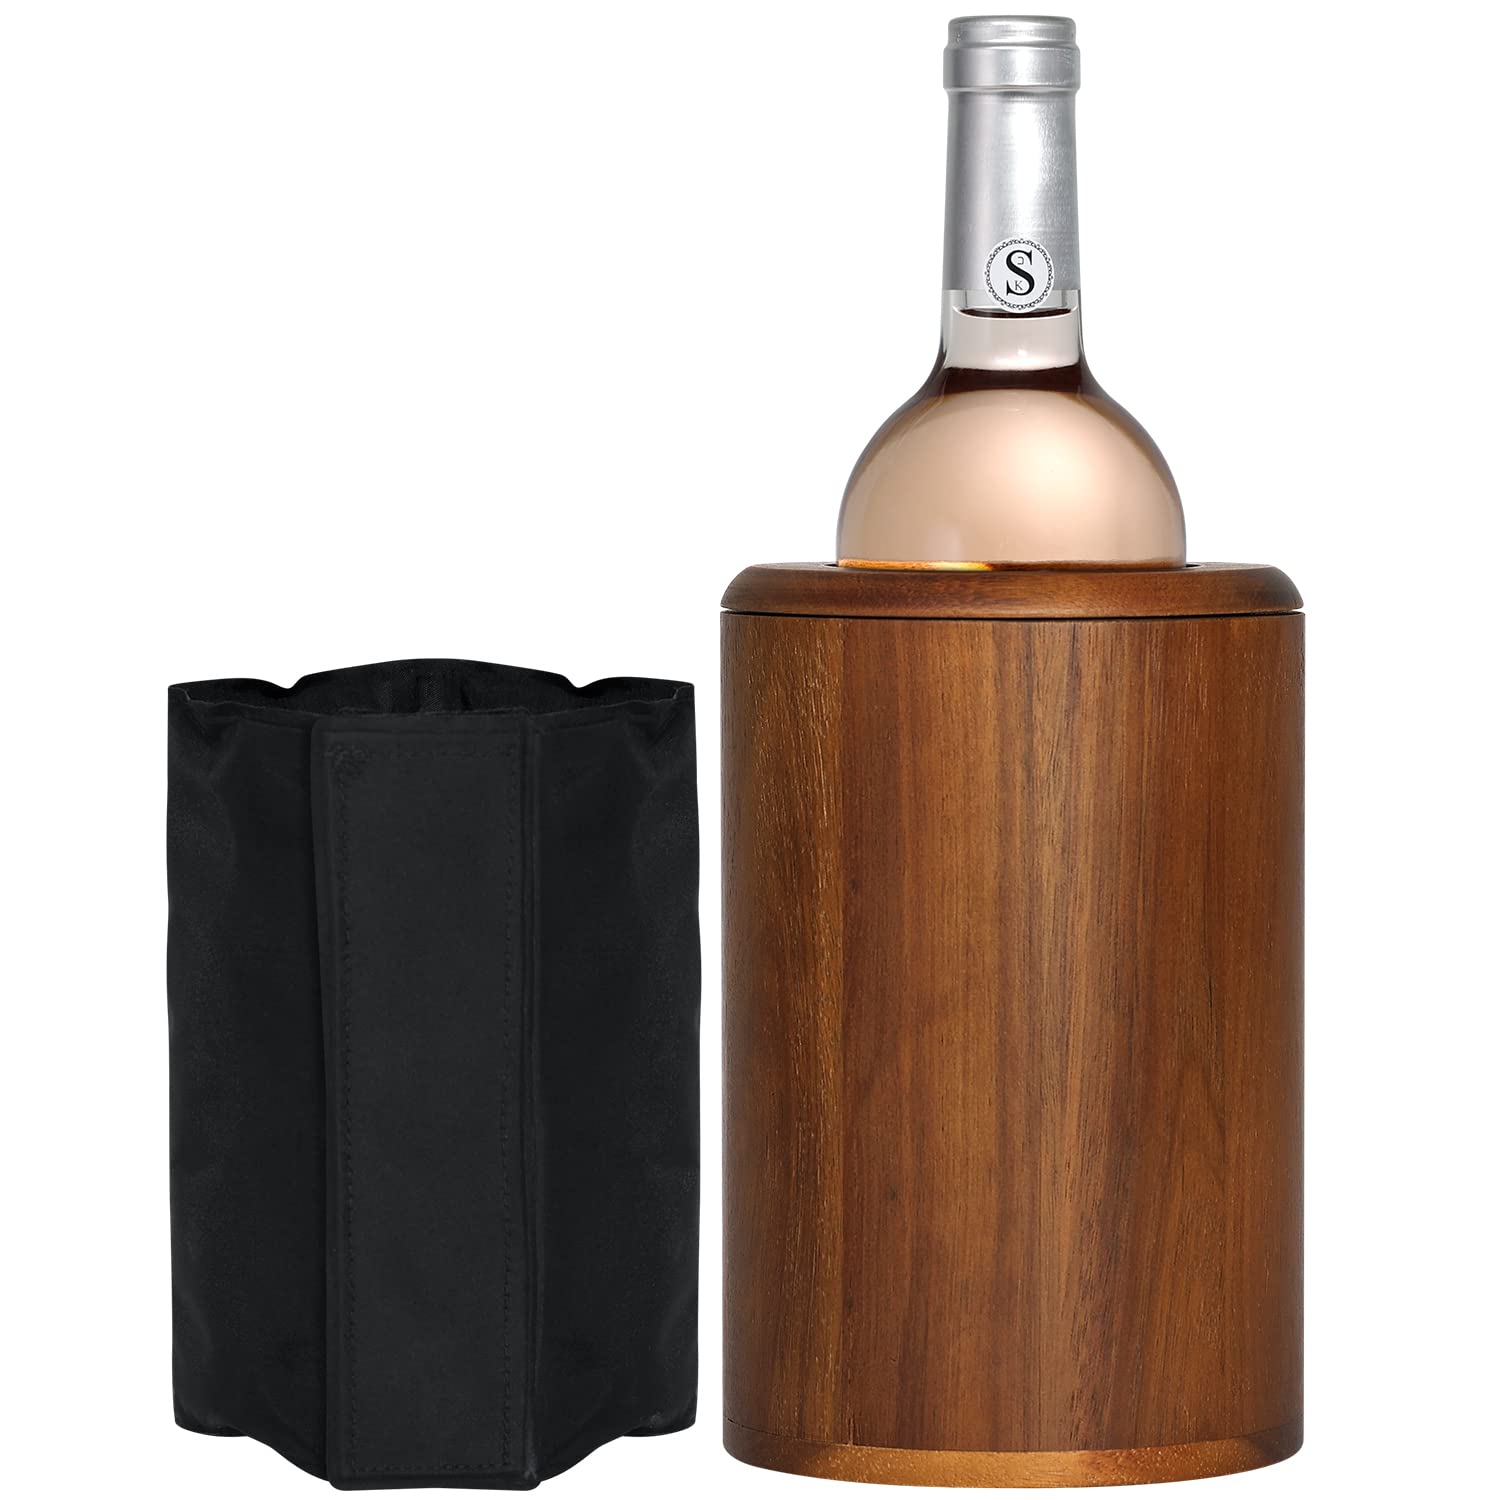 Homeries Marble Wine Chiller Bucket - Wine & Champagne Cooler for Parties, Dinner – Keep Wine & Beverages Cold – Holds Any 750ml Bottle - Ideal Gift for Wine Enthusiasts  - Good